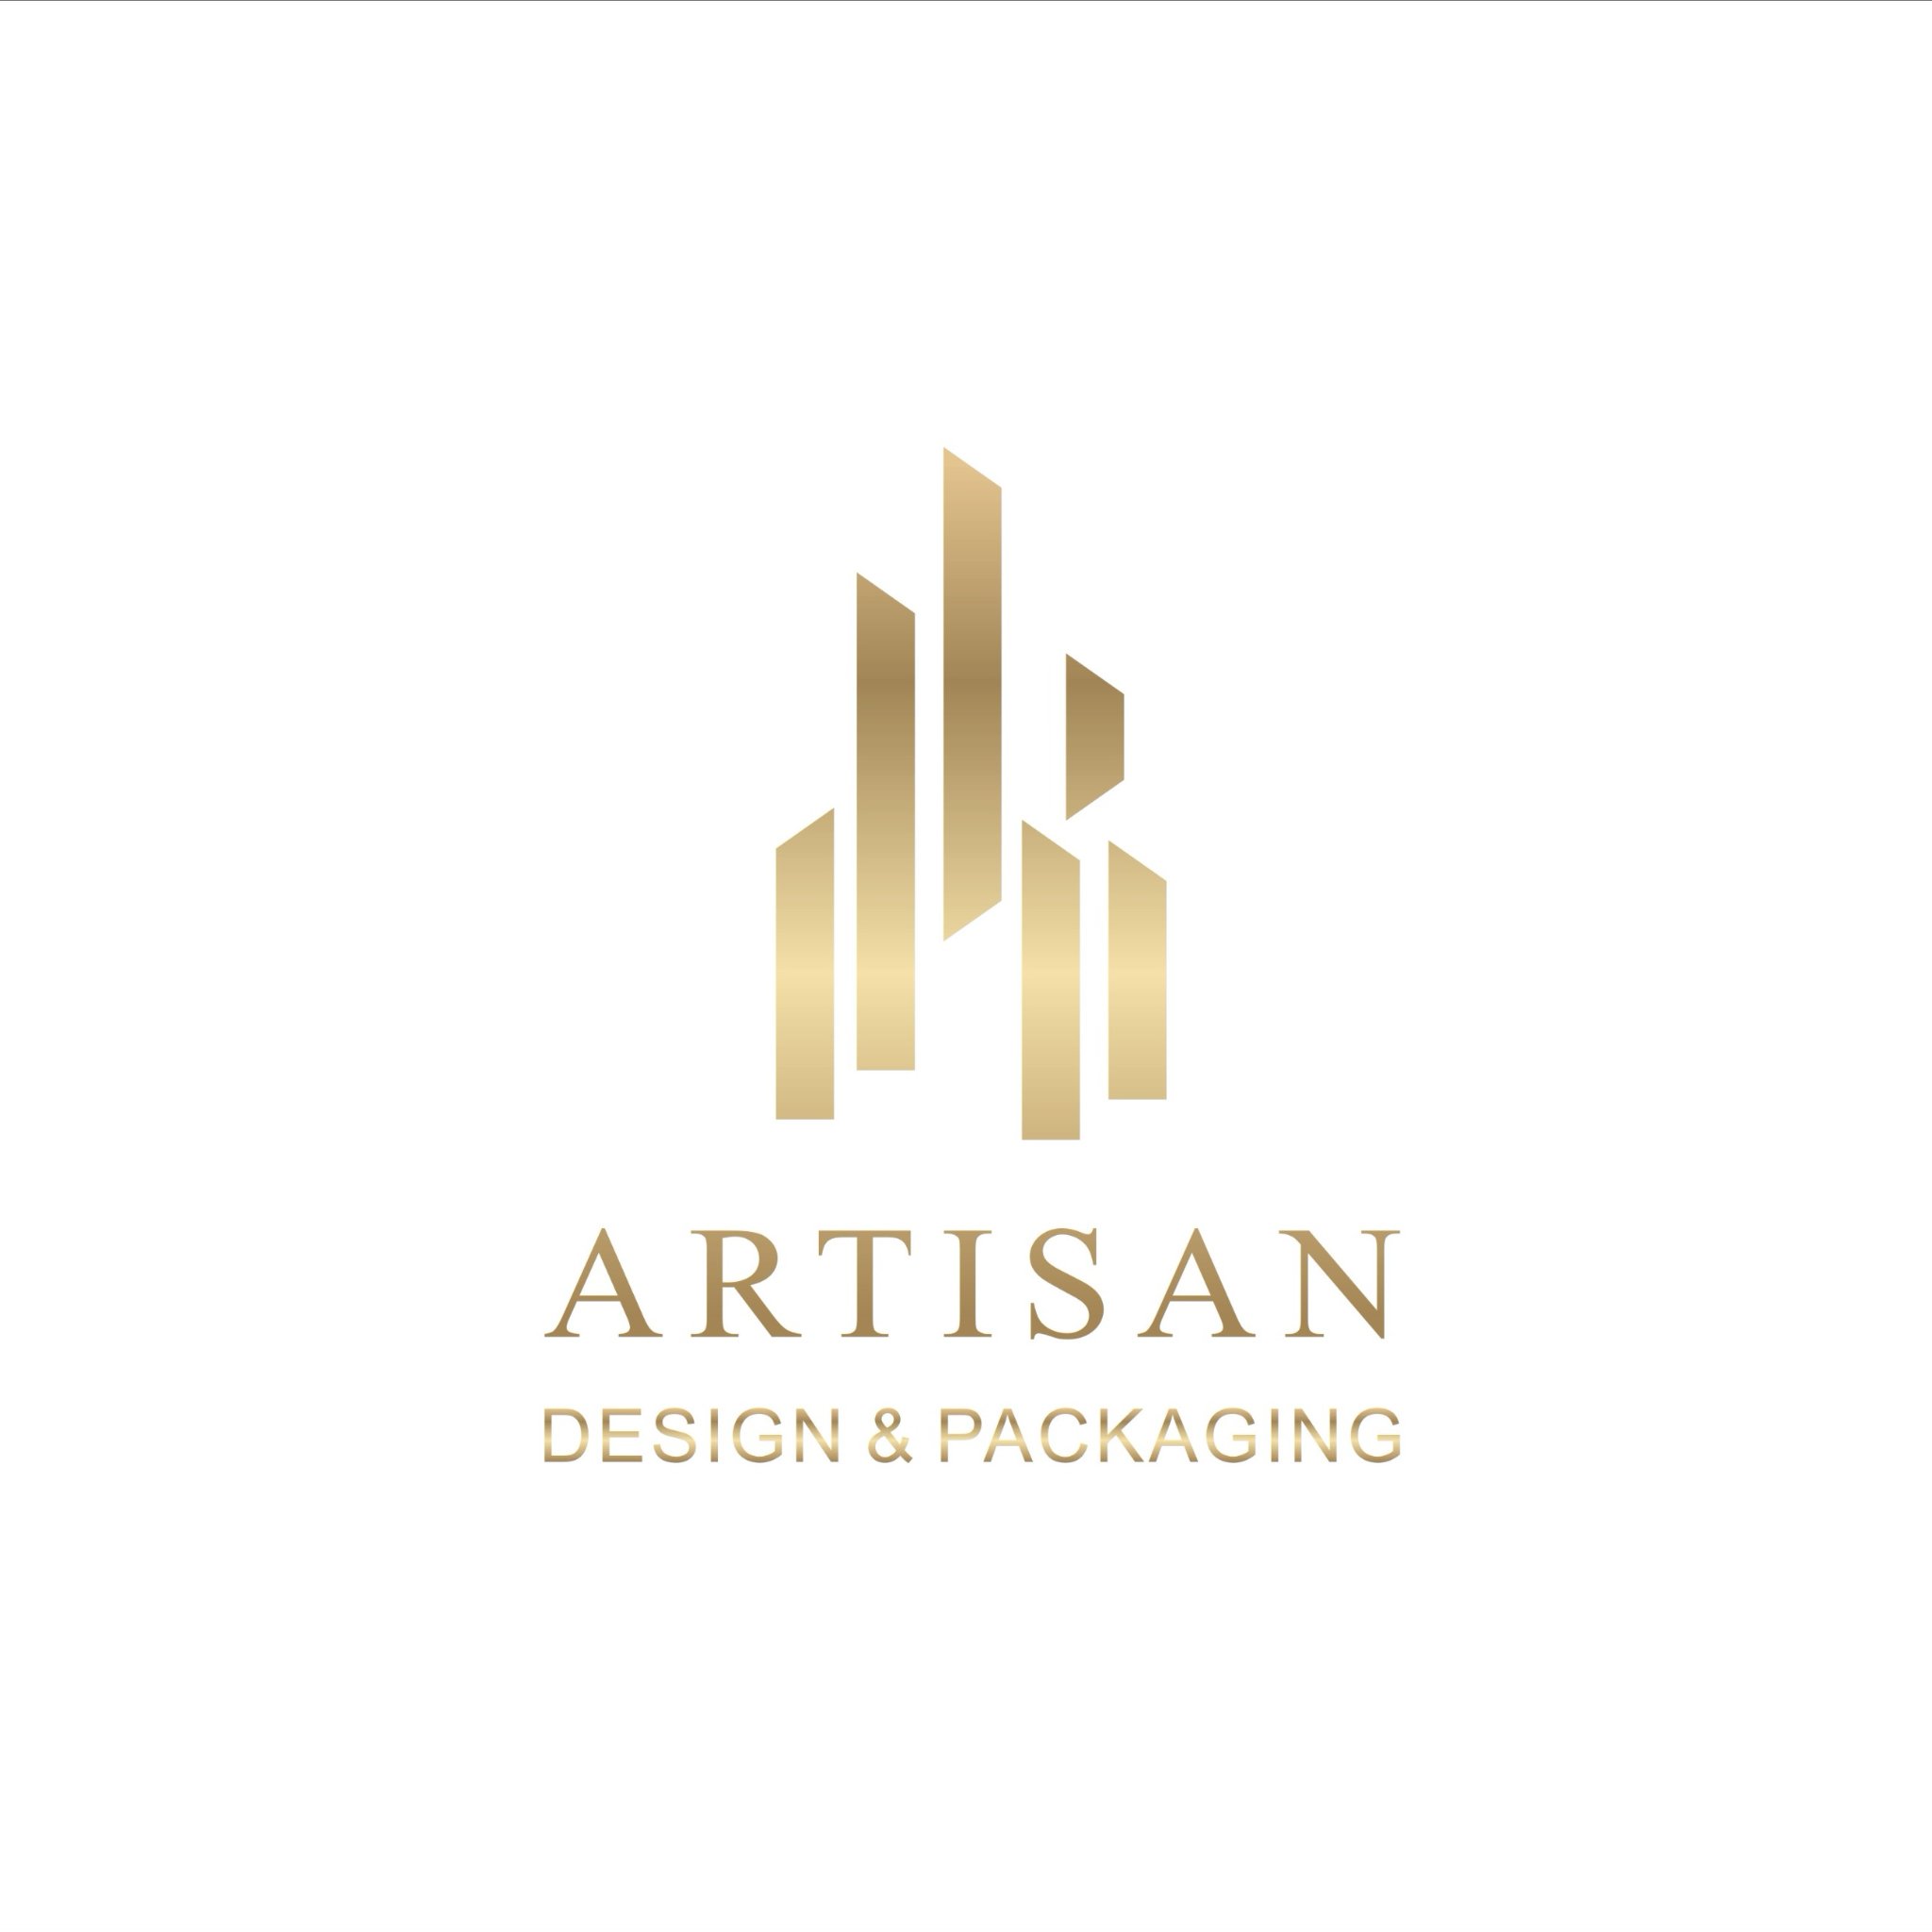 Artisan products range:
Jewelry display sets/trays/boxes/bust stands/metal display stands etc.